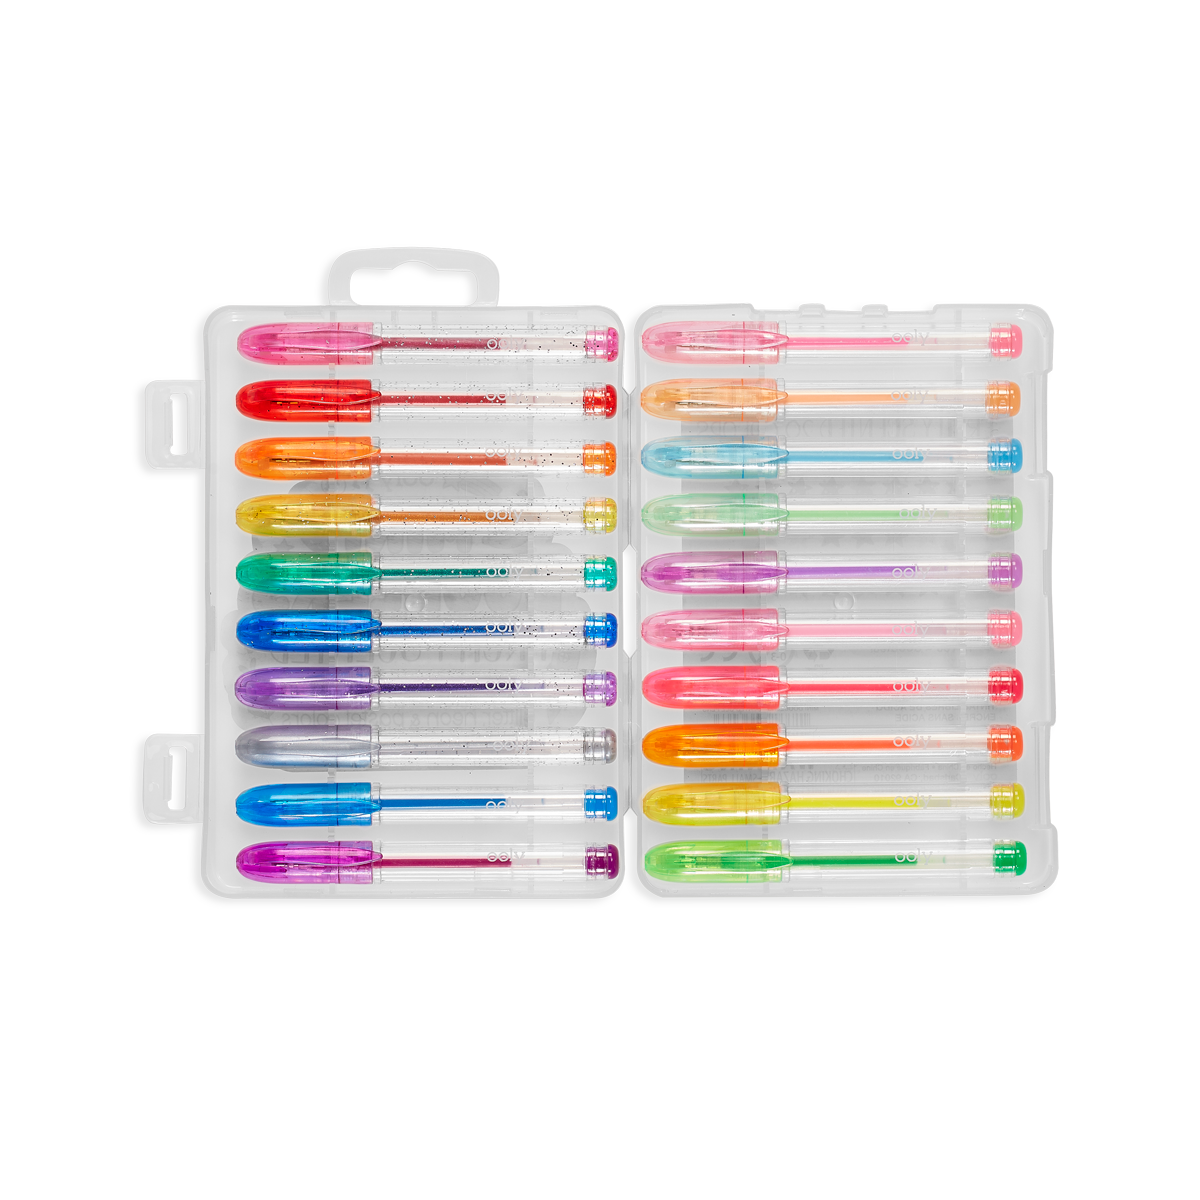  Scribble Stuff Scented Gel Pens - 30 Count - Includes Storage  Box : Office Products